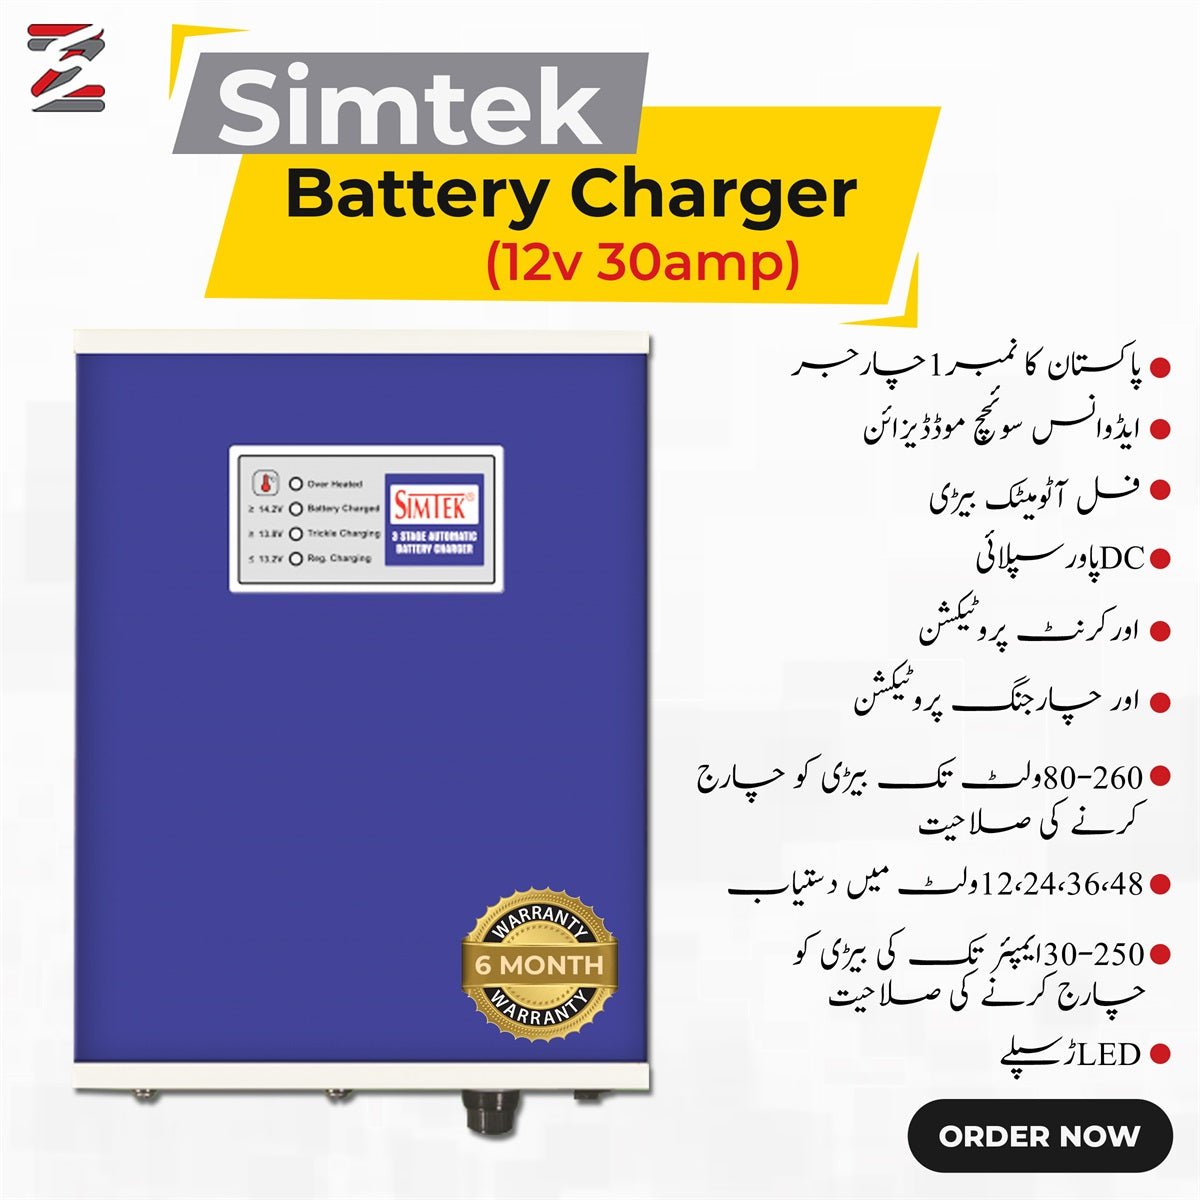 Simtek Battery Charger 12V 30AMPBuy Simtek Best Battery Charger in Pakistan, Hyderabad, Karachi. We Provide Online at the best price with online Technical Support. Repairable &amp; with a Warranty Simtek Battery Charger 12V 30AMPZam Zam Store